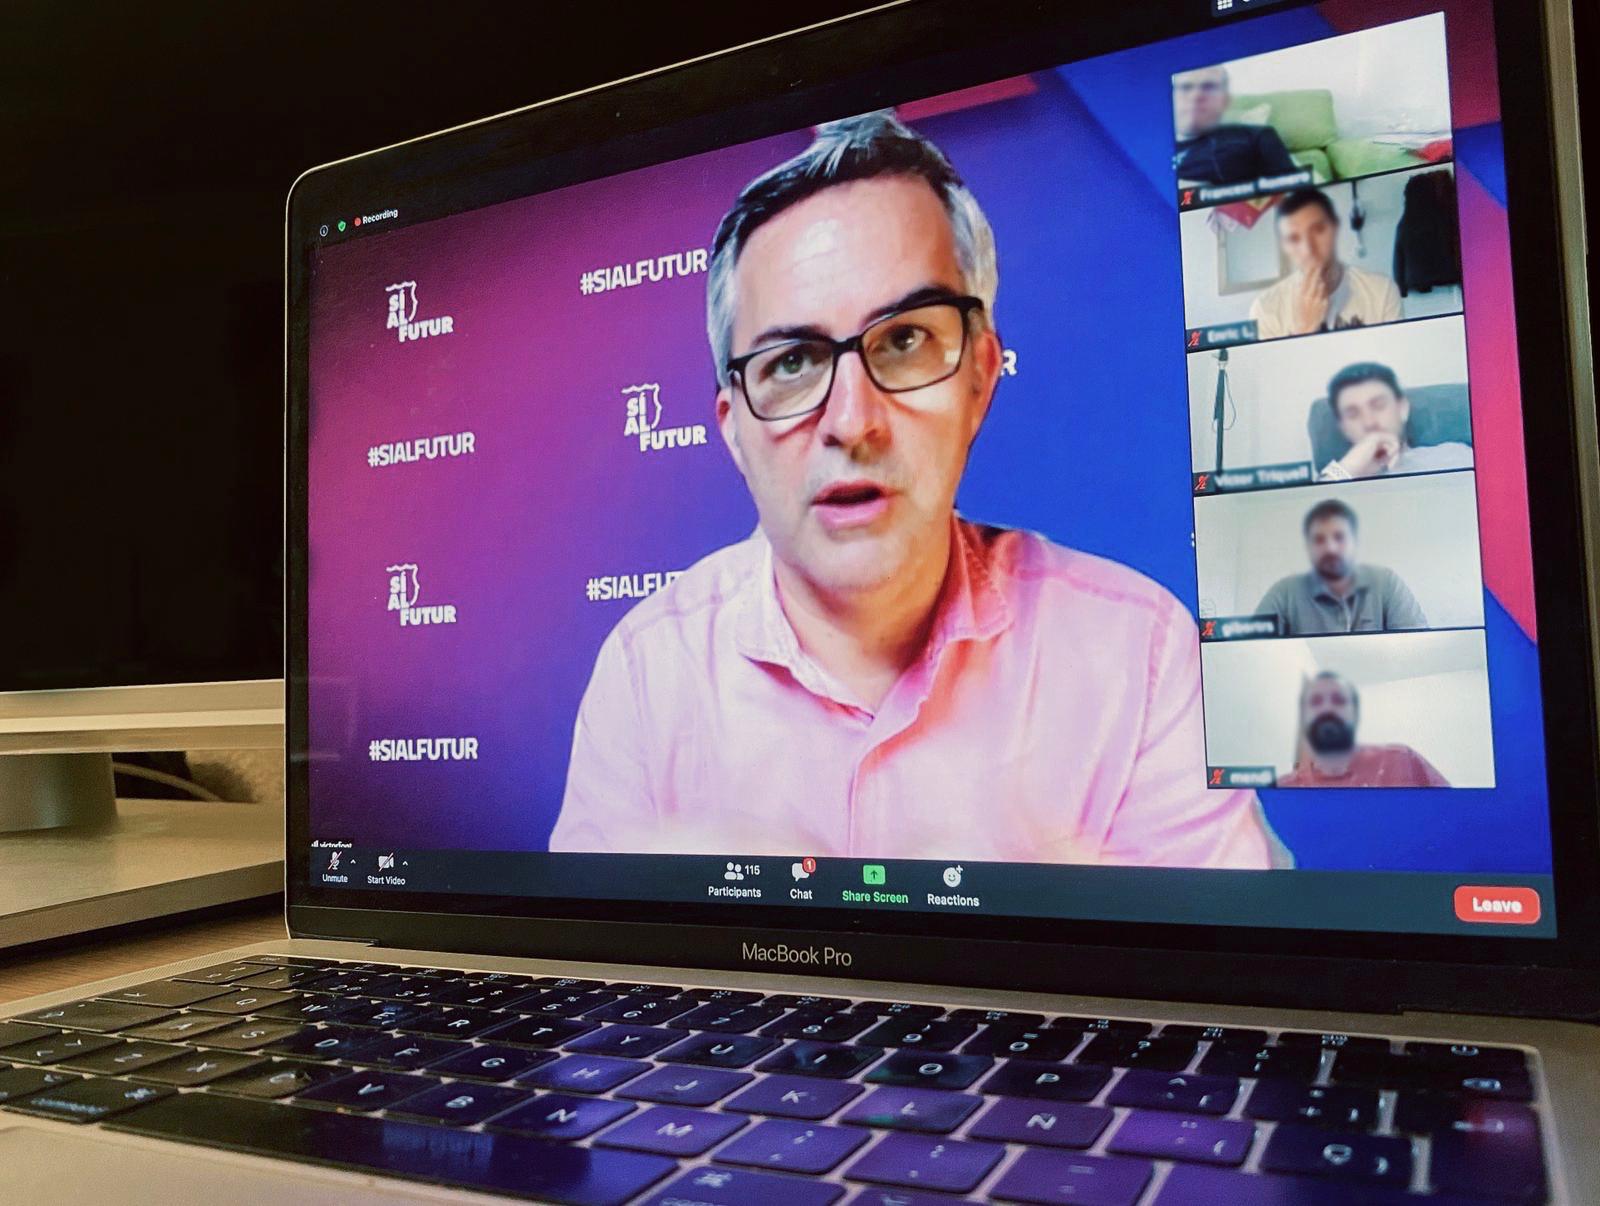 150 Barcelona supporters took part in the fifth online meeting with Víctor Font